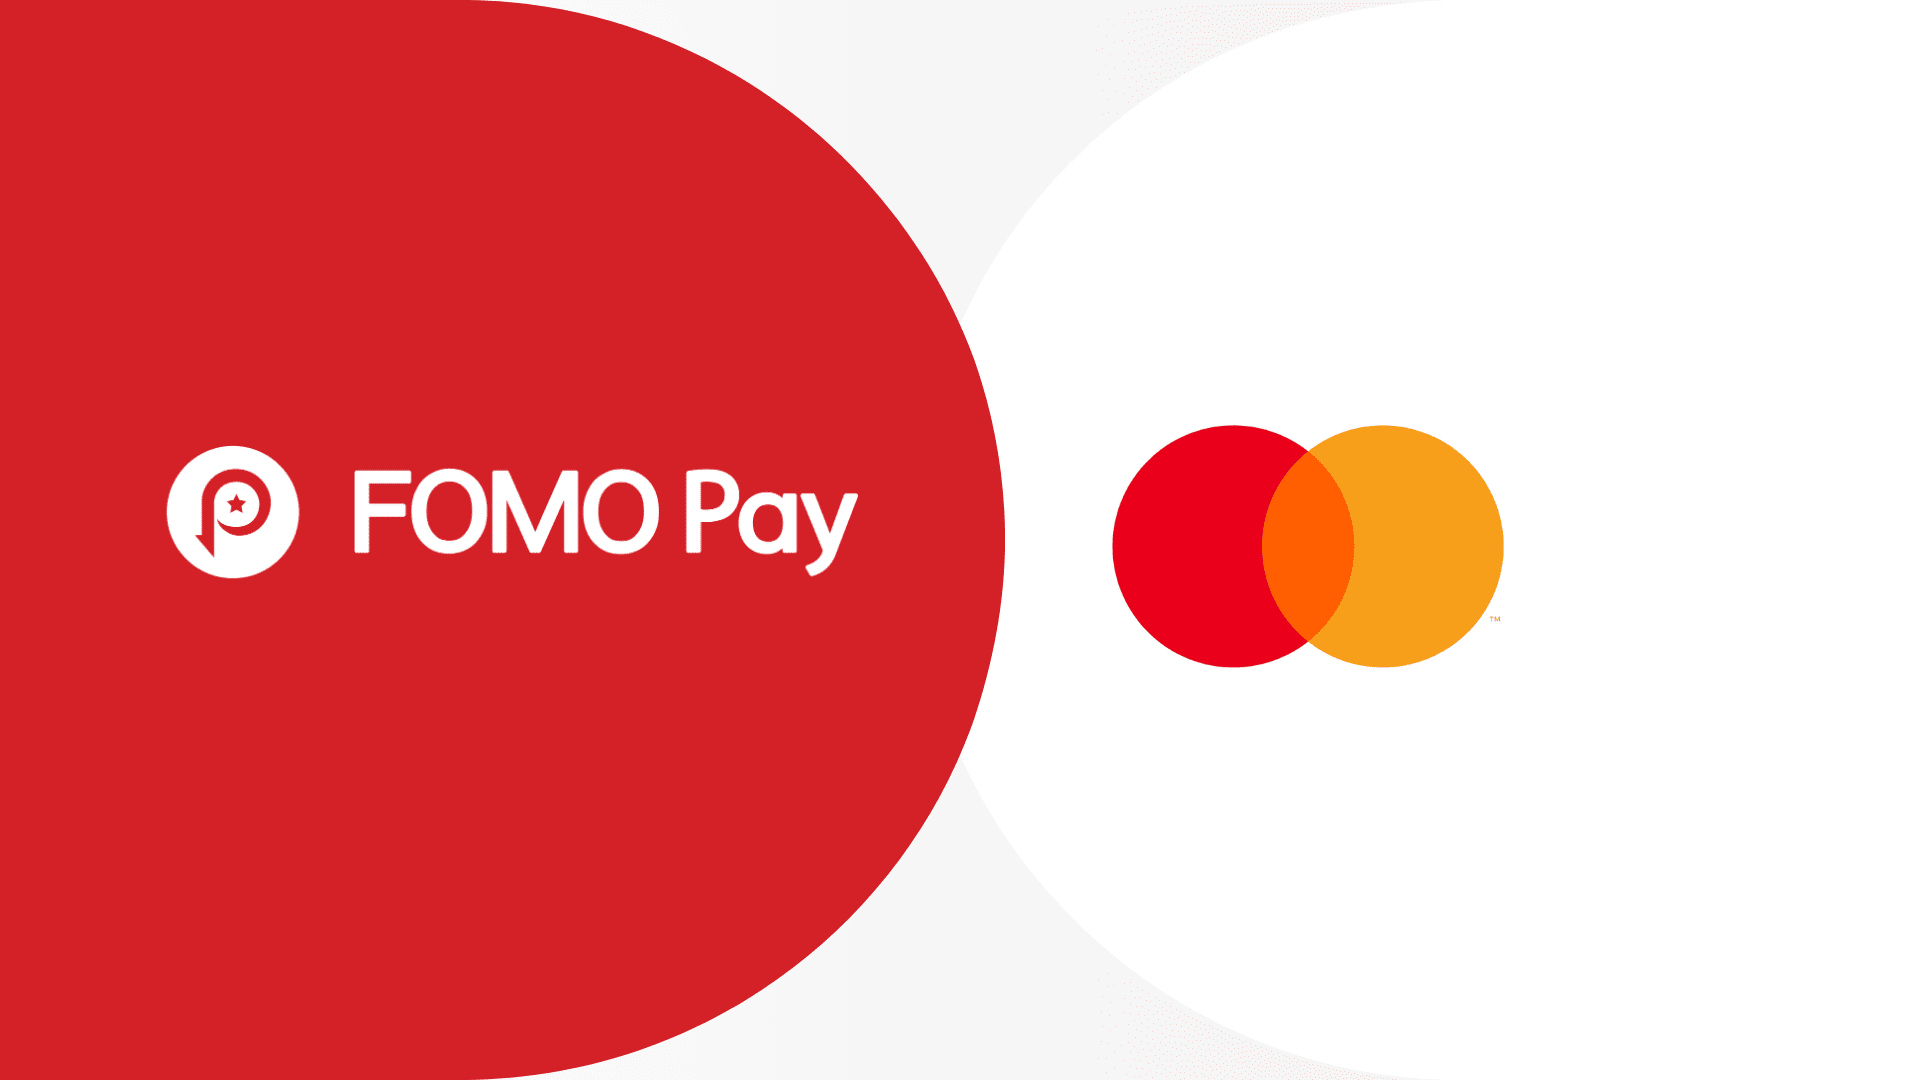 Mastercard and FOMO Pay Introduce Mastercard QR within SGQR, allowing cardholders to scan and pay using their Mastercard cards